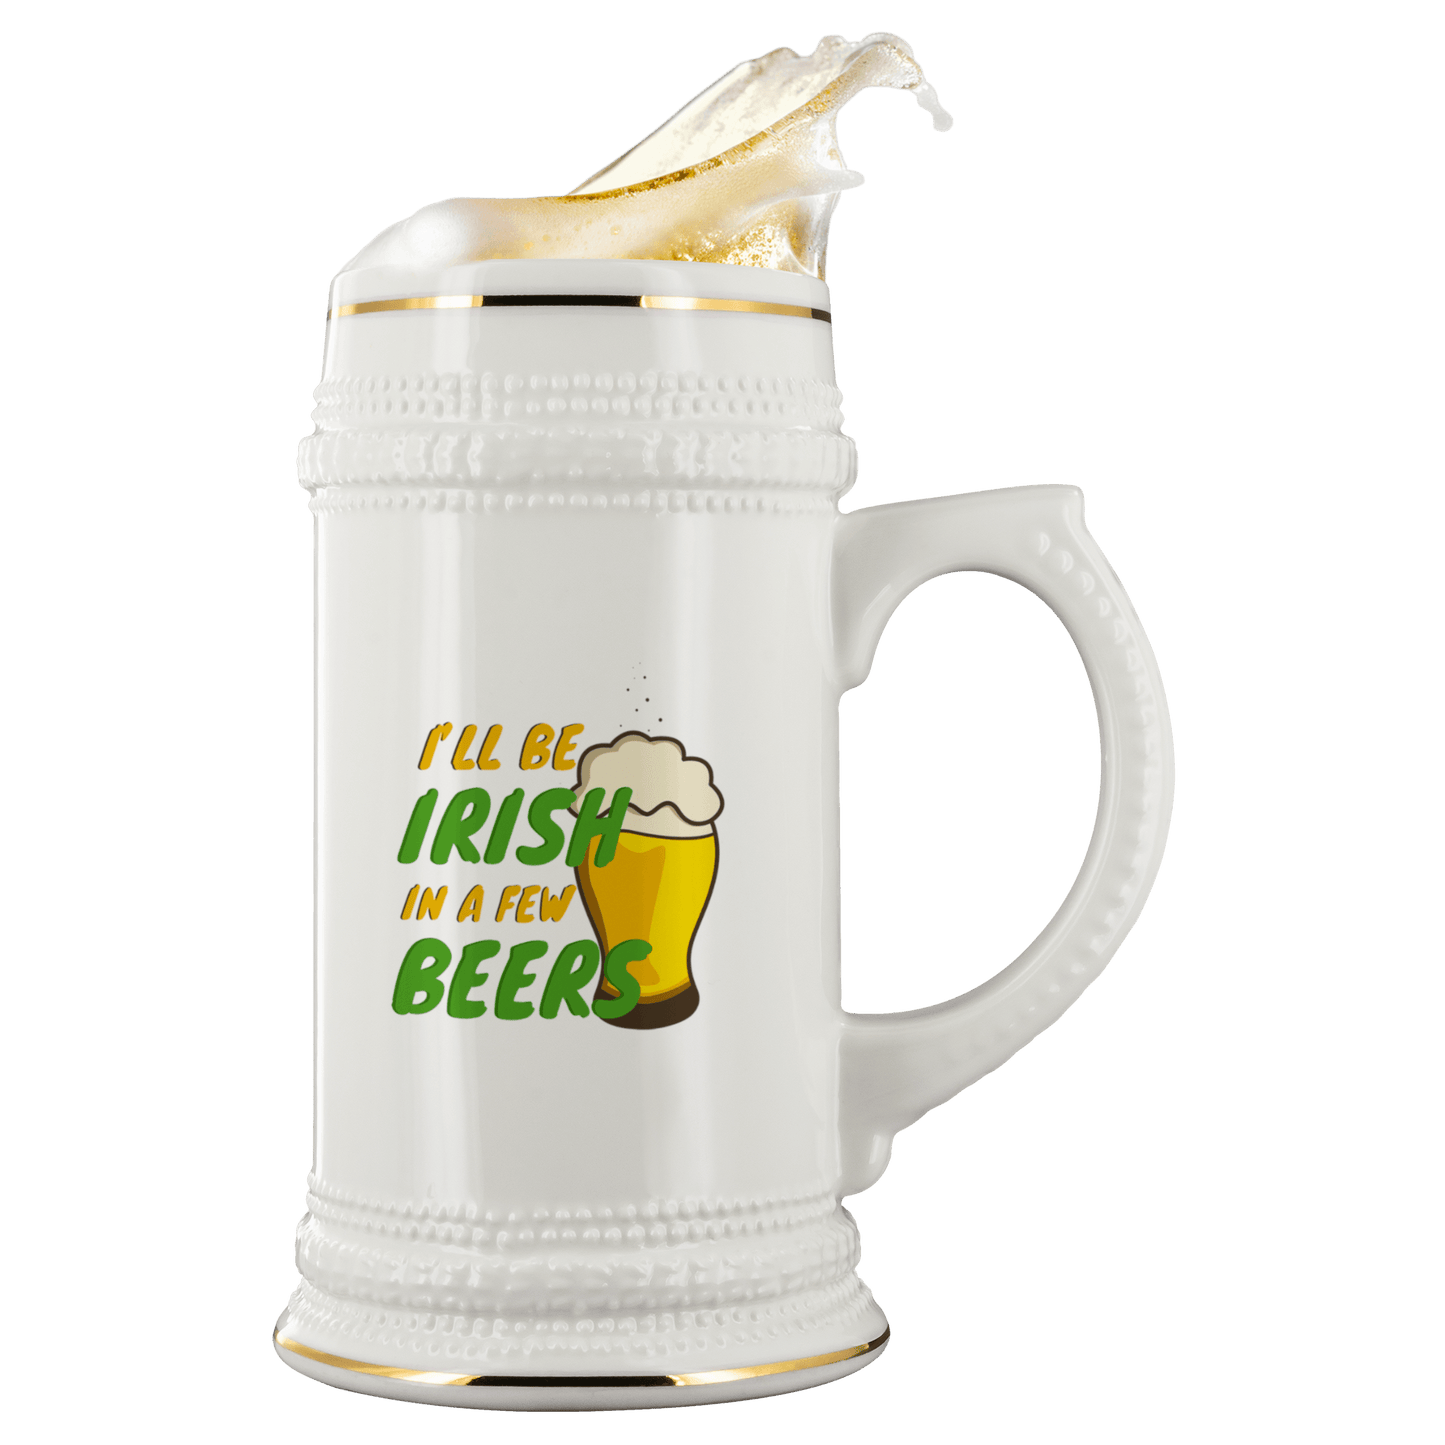 I'll Be Irish In A Few Beers 22oz Ceramic Beer Stein